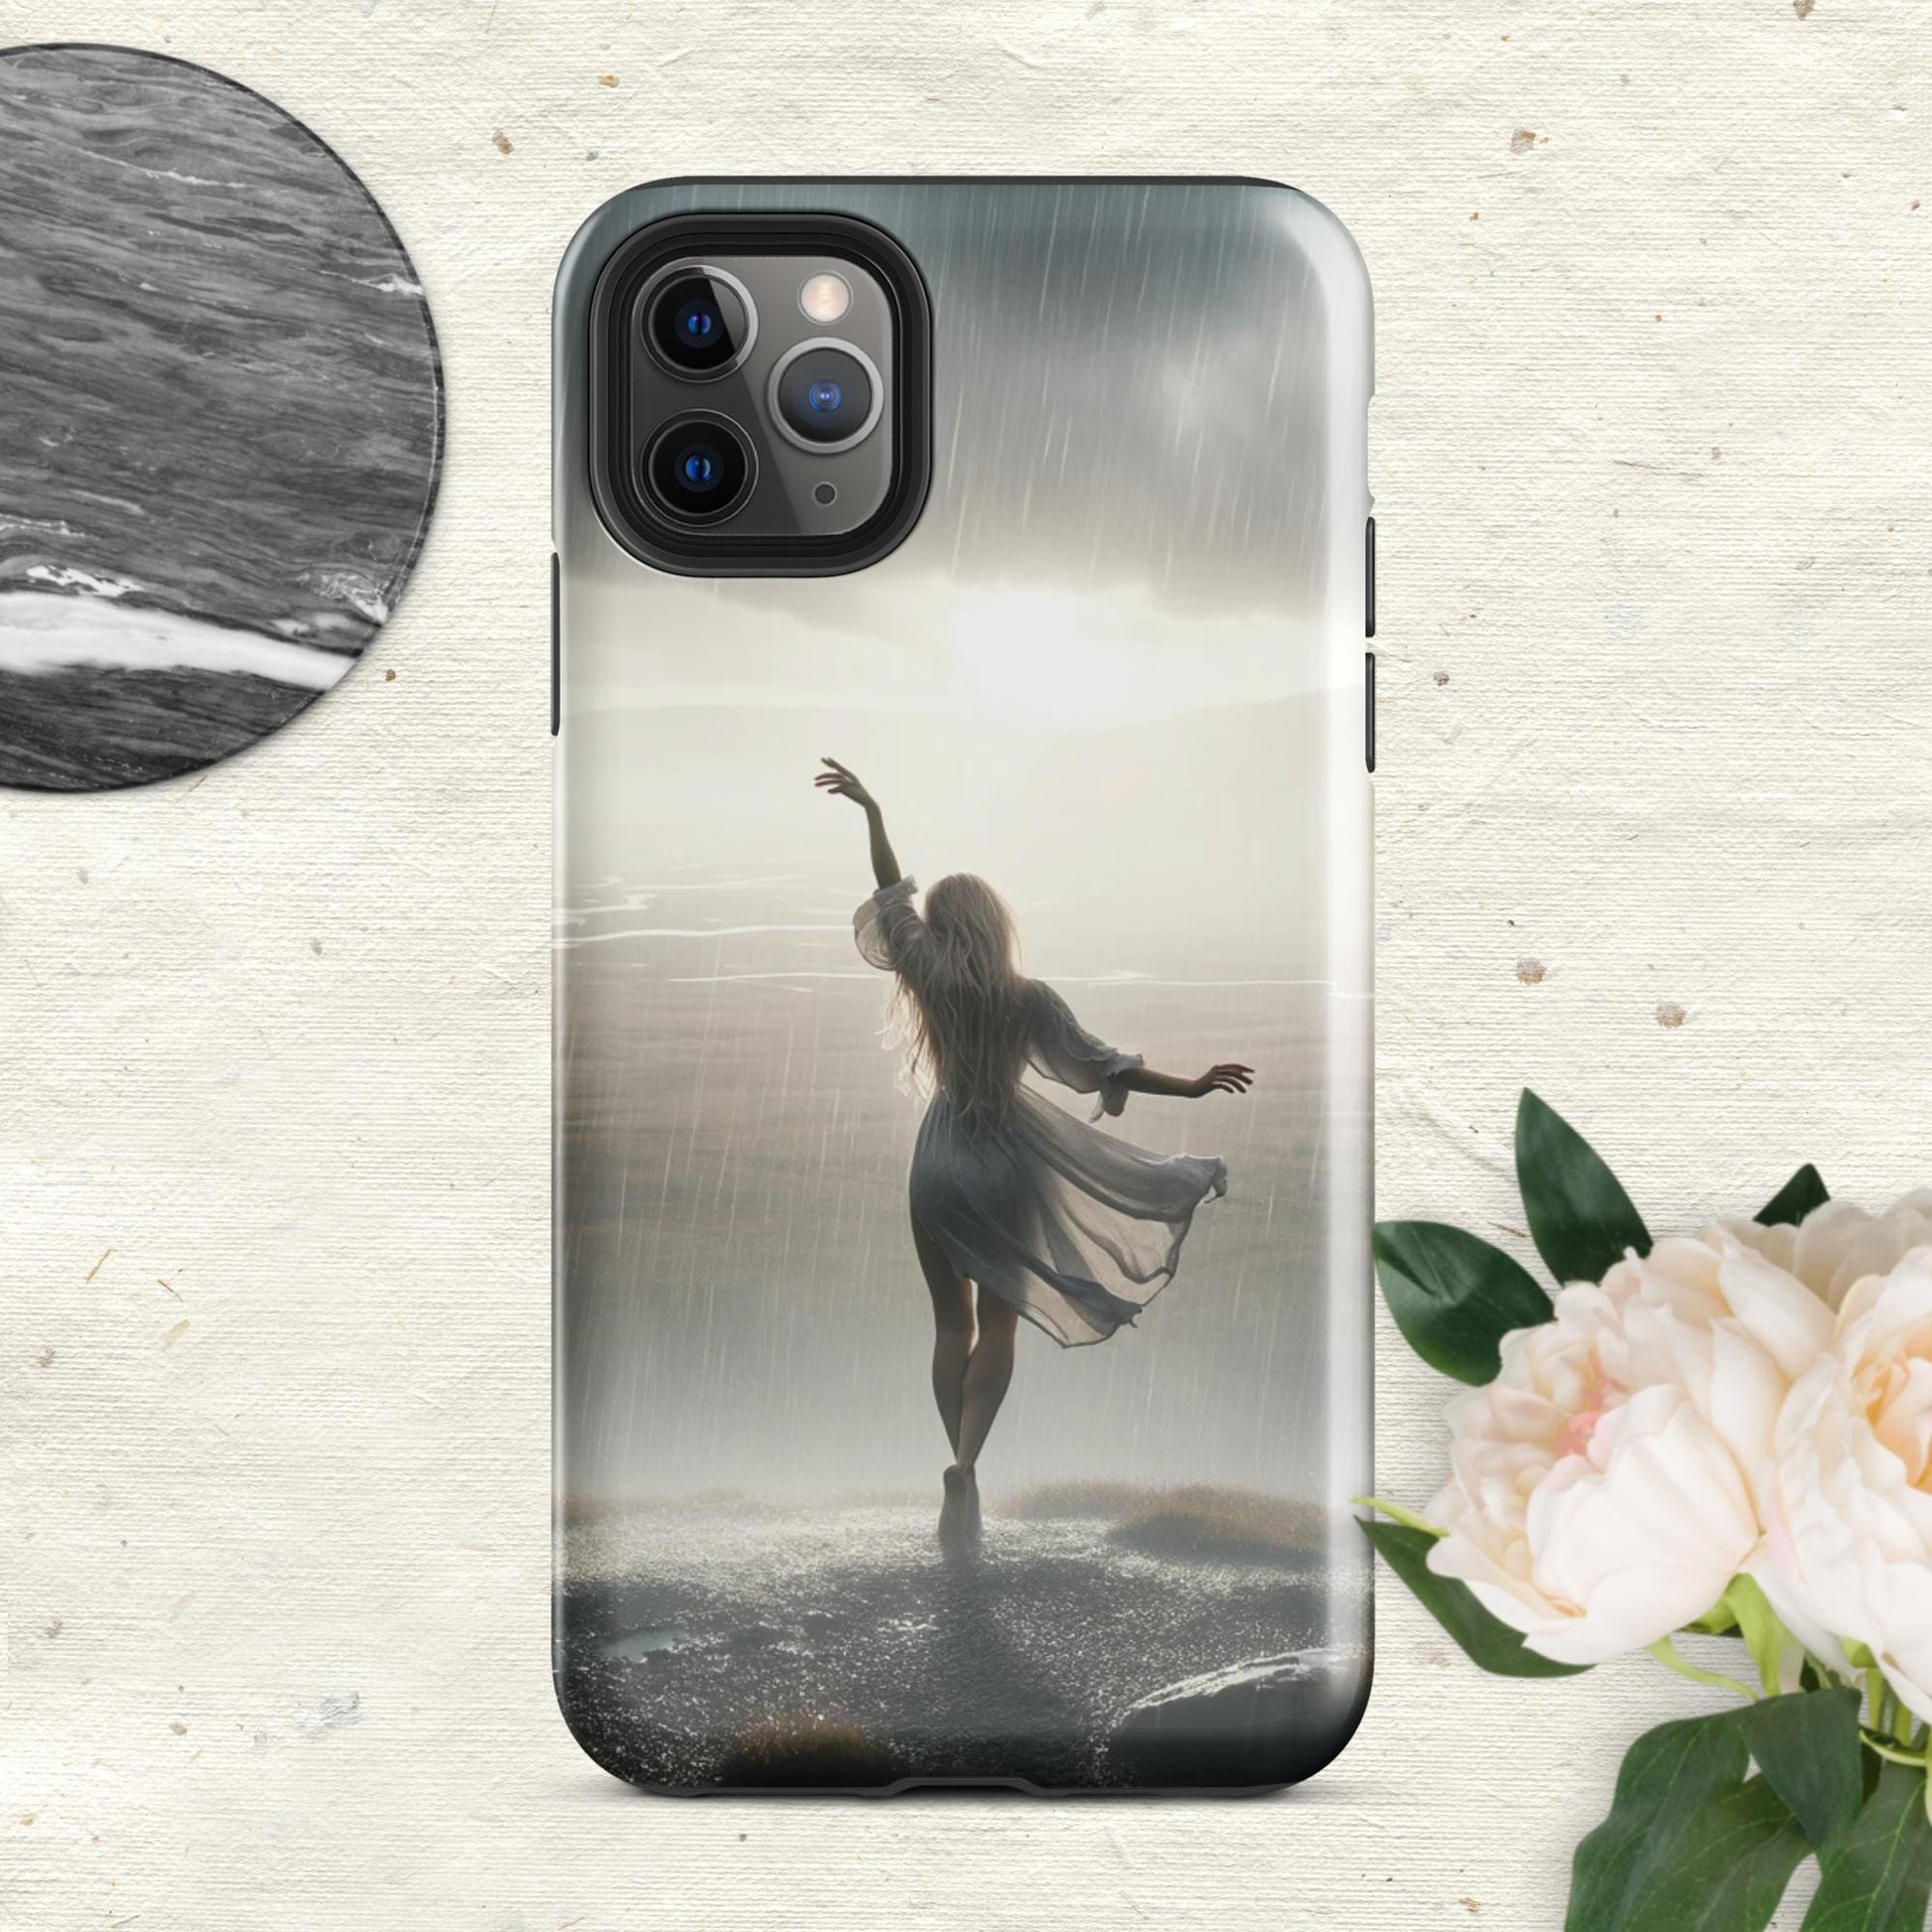 The Hologram Hook Up Glossy / iPhone 11 Pro Max Rain Blessing Tough Case for iPhone®